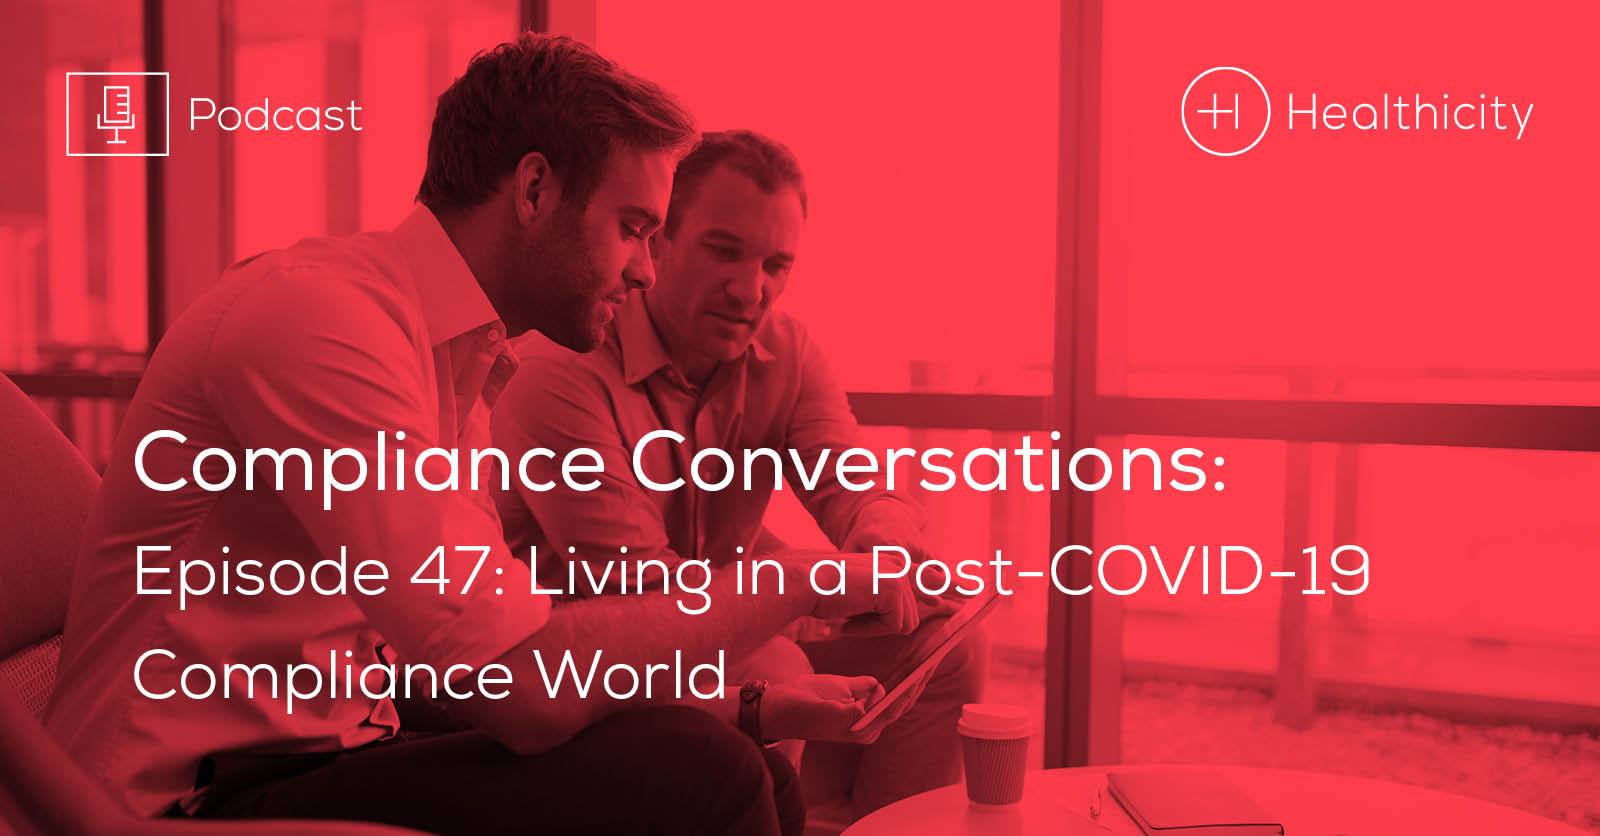 Listen to the Episode - Living in a Post-COVID-19 Compliance World